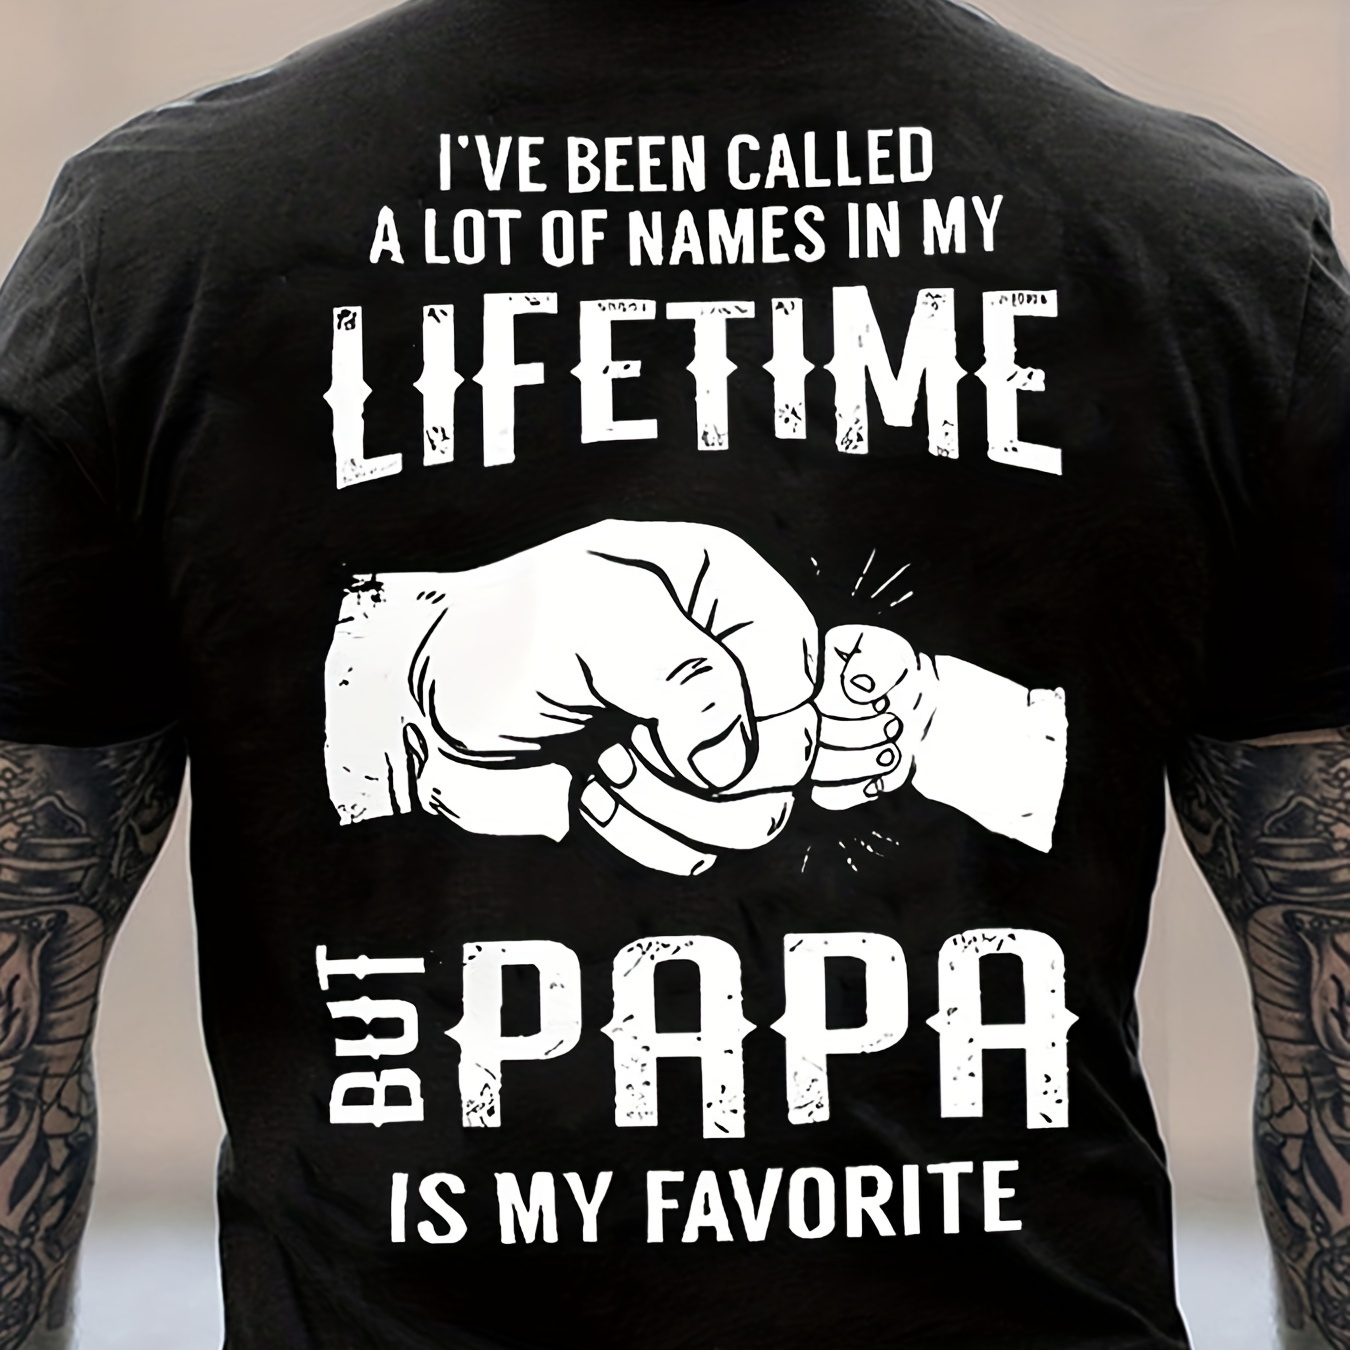 

Papa Letter Print Men's Casual Short-sleeved T-shirt For Summer, Trendy Funny Elastic Round Neck Graphic Tee Loungewear Top Father's Day Gift